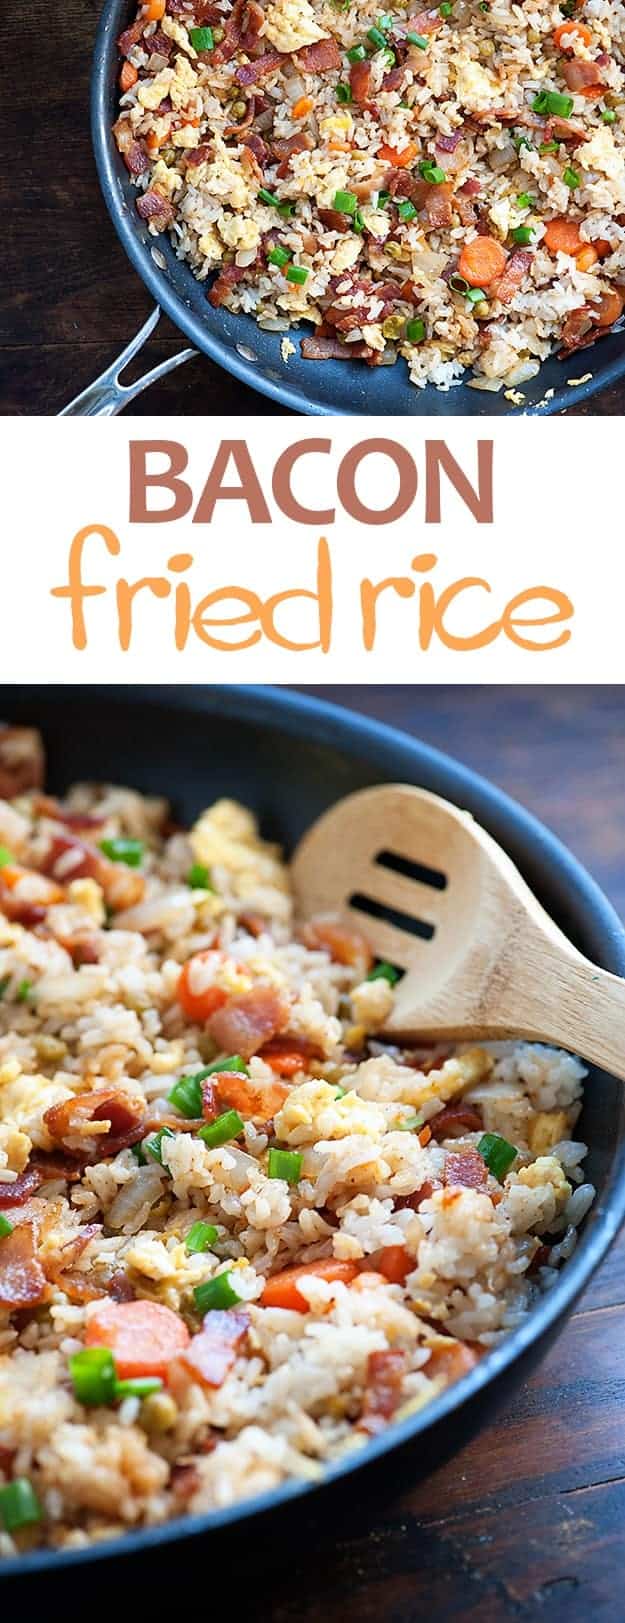 An overhead view of bacon fried rice in a skillet.